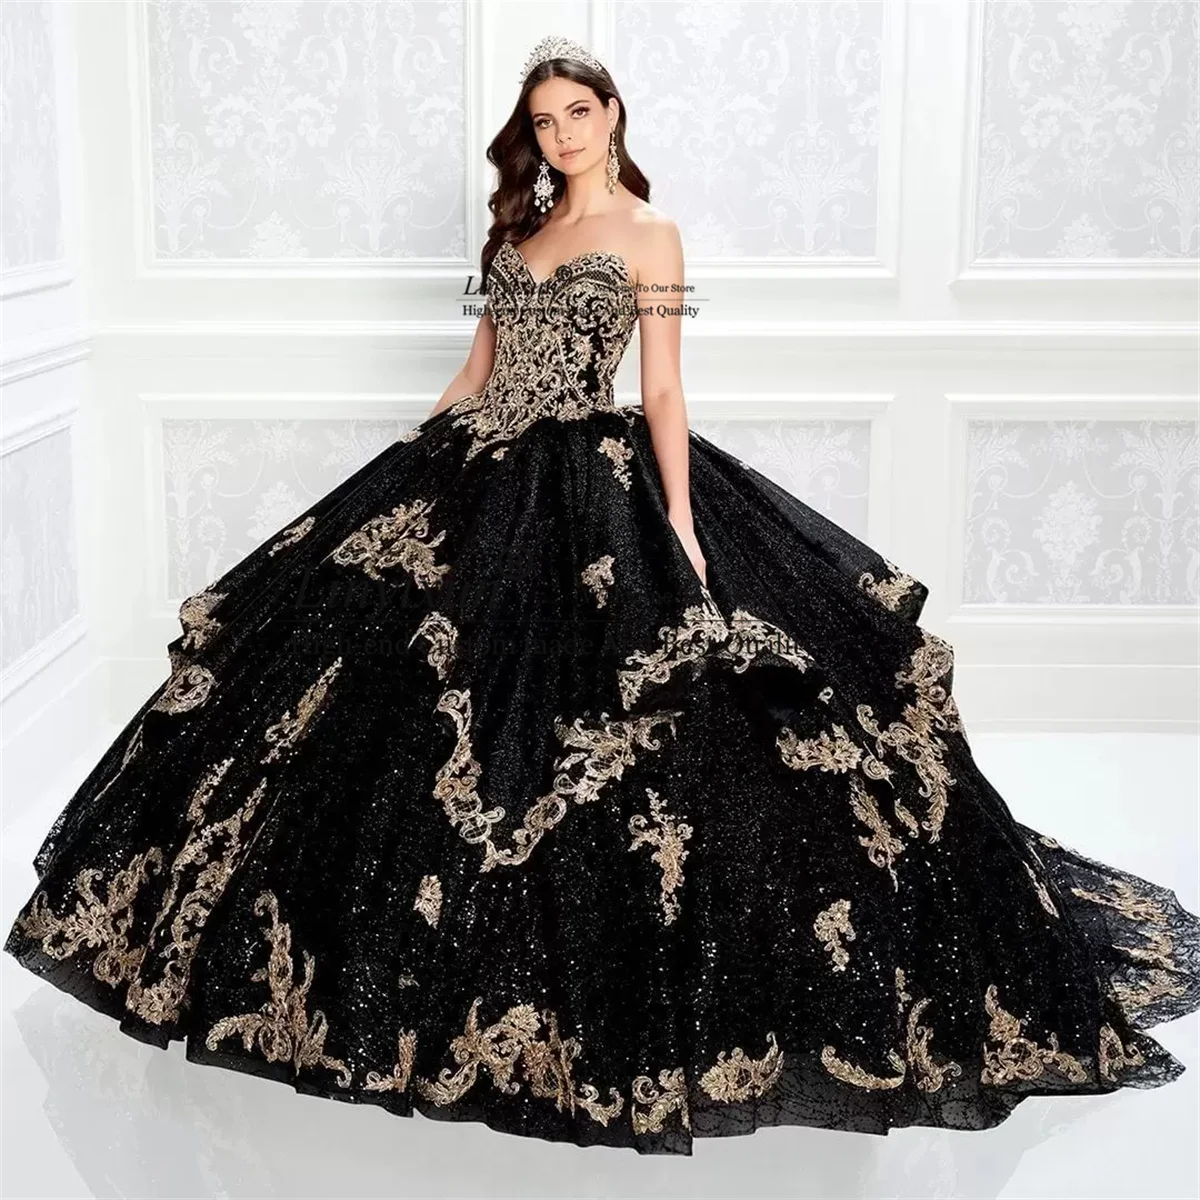 

Shining Black Ball Gown Quinceanera Dresses Lace Appliqued Beaded Sweetheart vestidos de 15 años Sweep Train Sweet 16 Dress